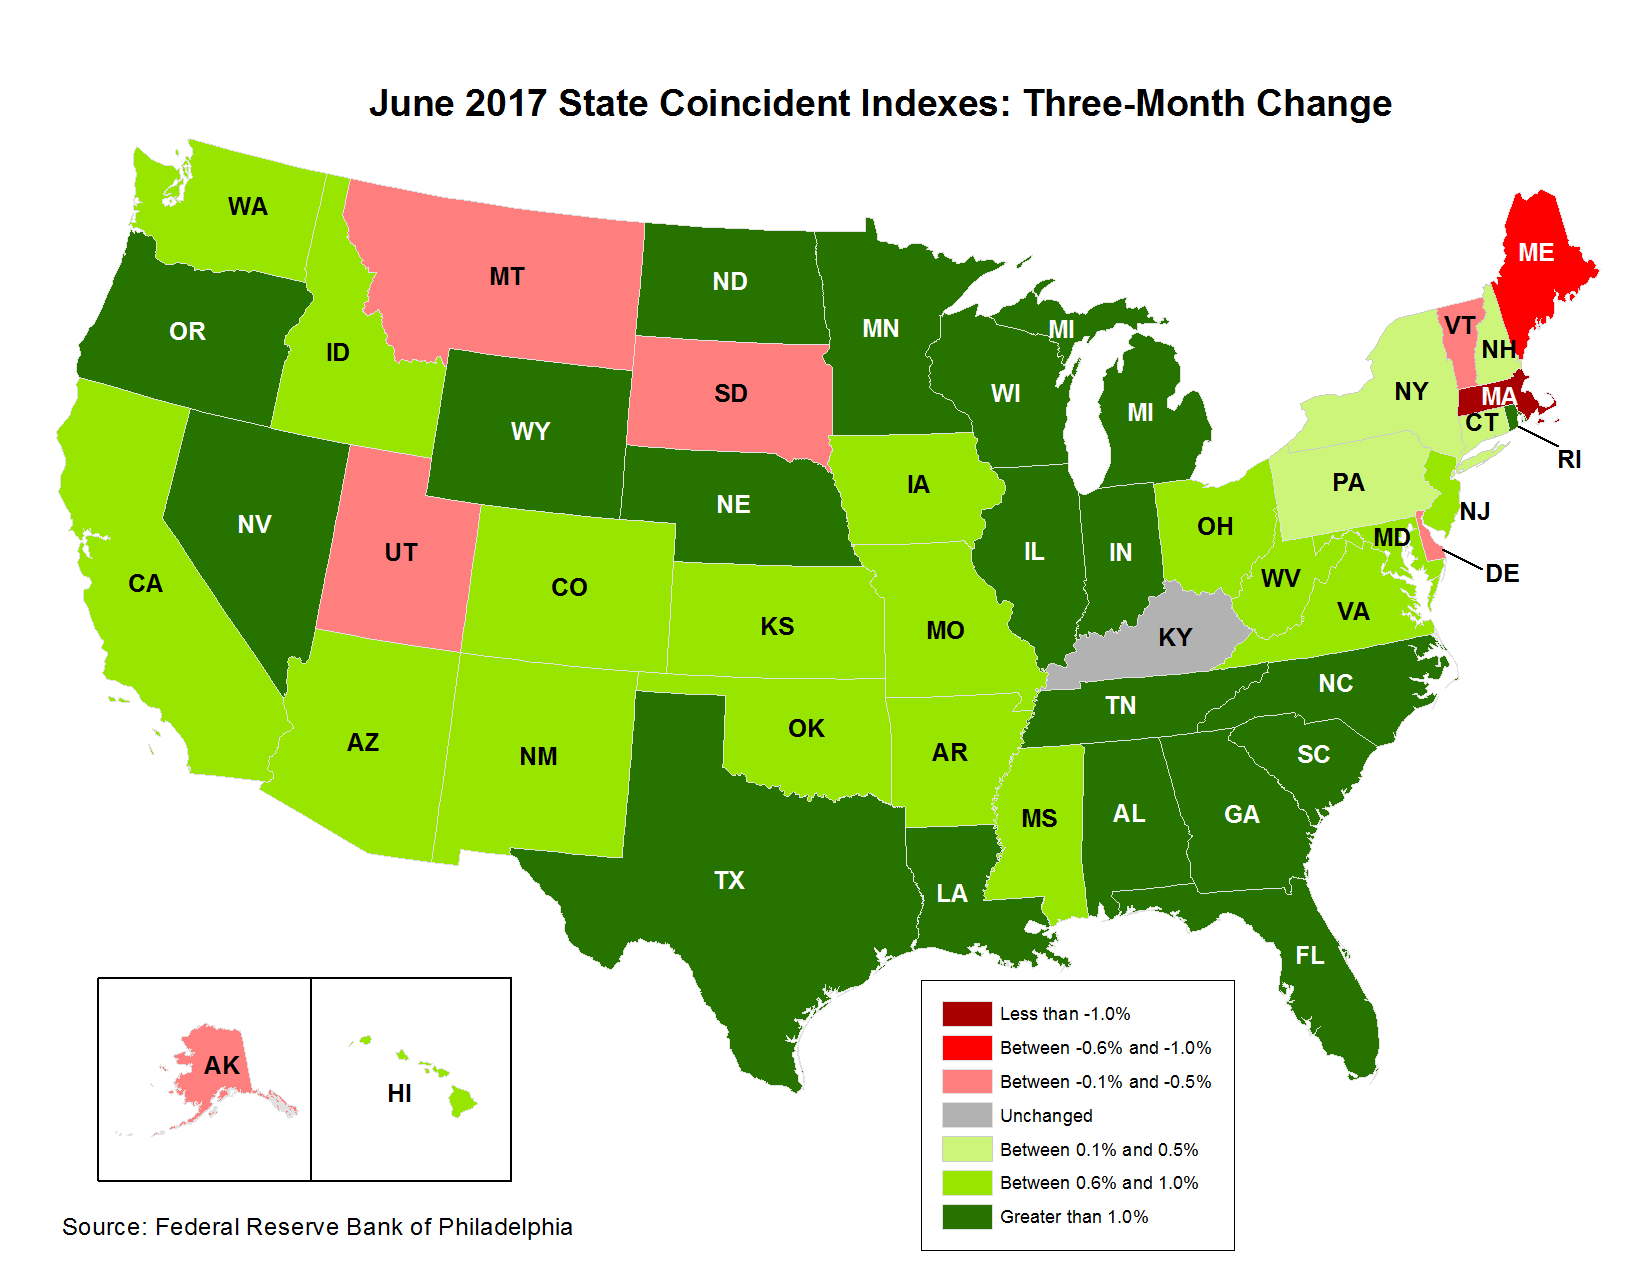 Map of the U.S. showing the State Coincident Indexes Three-Month Change in June 2017